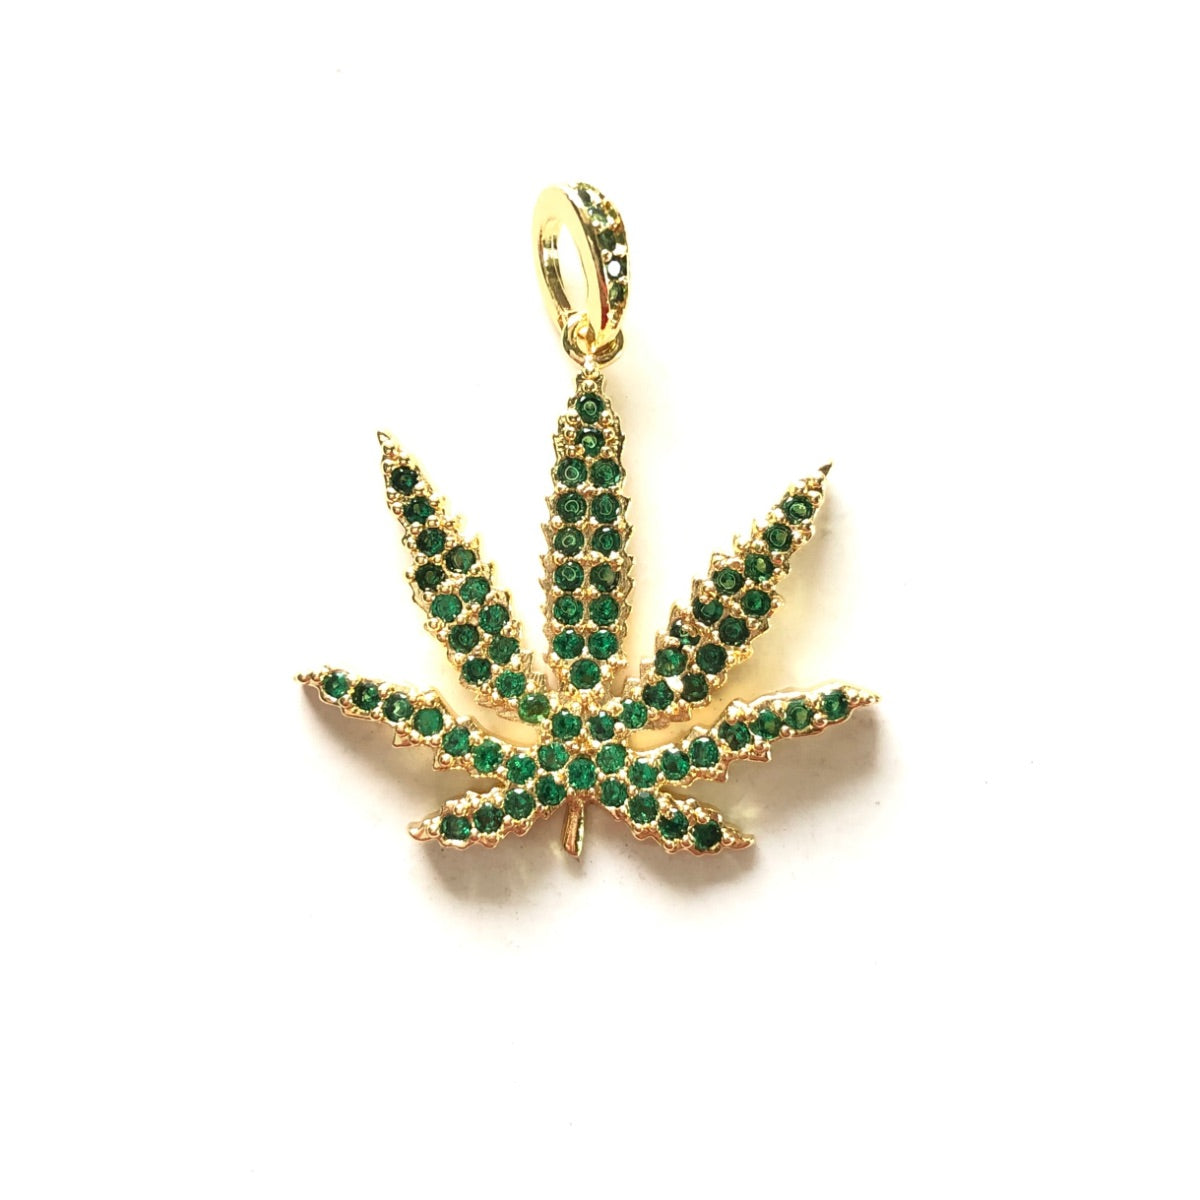 5pcs/lot 25*21.5mm Green CZ Paved Cannabis Leaf Plant Charms Green on Gold CZ Paved Charms Colorful Zirconia Flowers Charms Beads Beyond